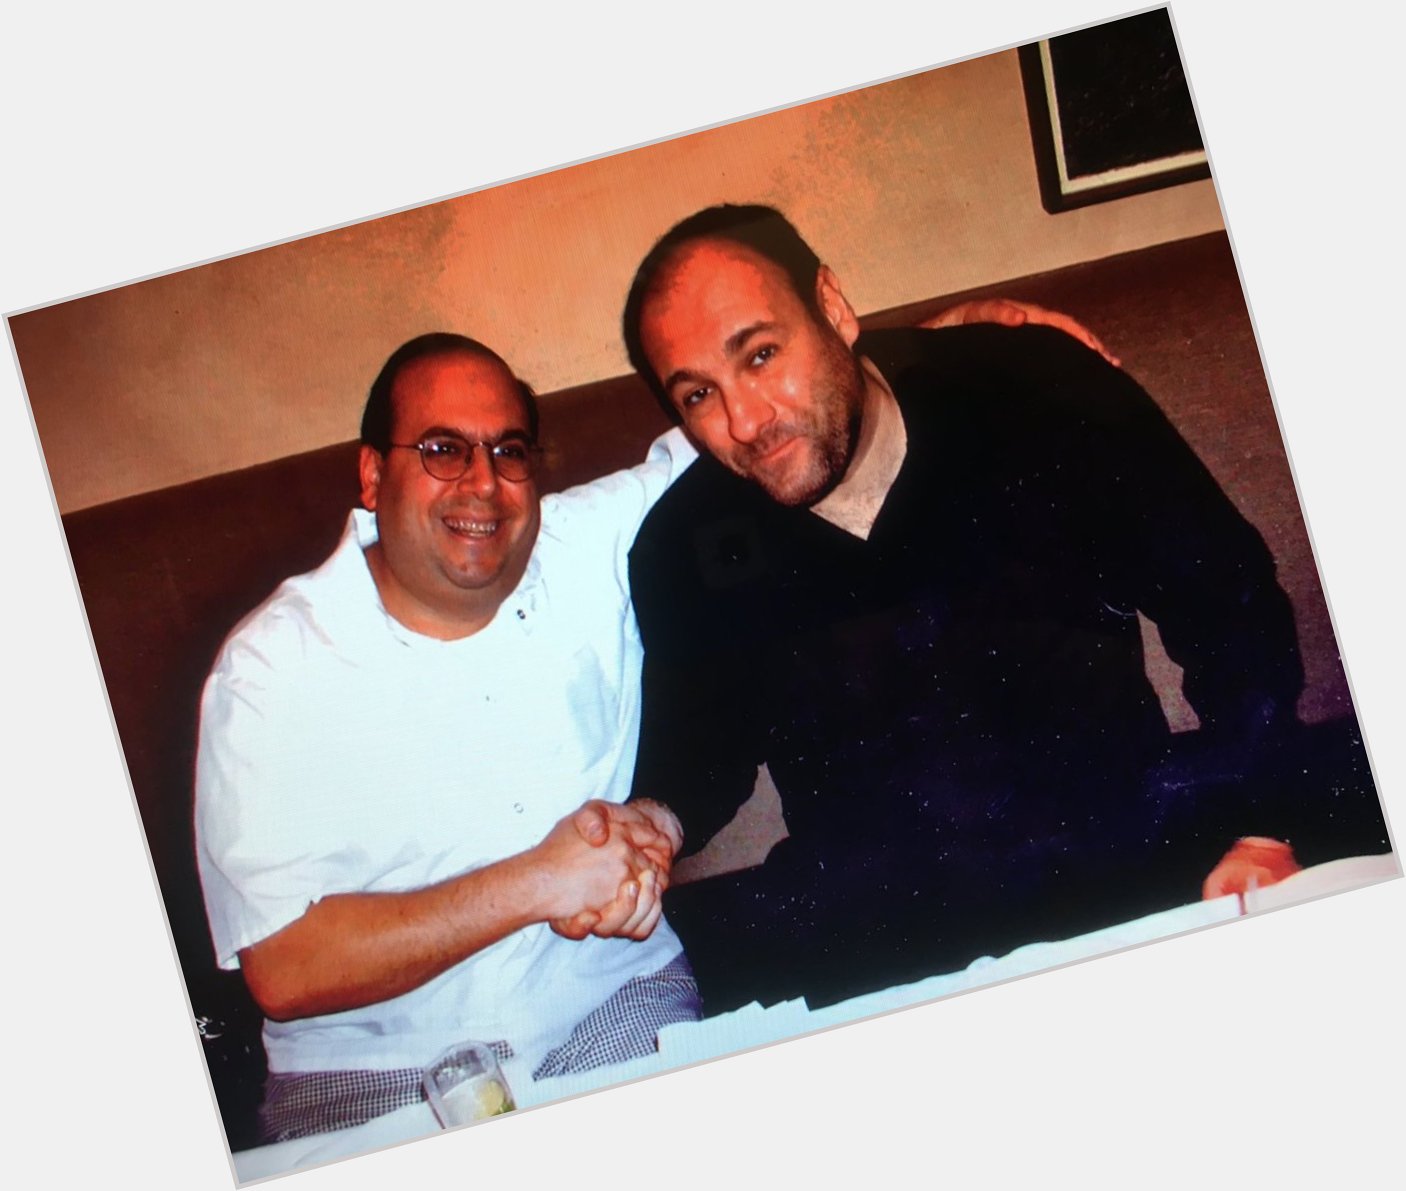 We also want to wish a very happy birthday to our friend in heaven James Gandolfini!!! 